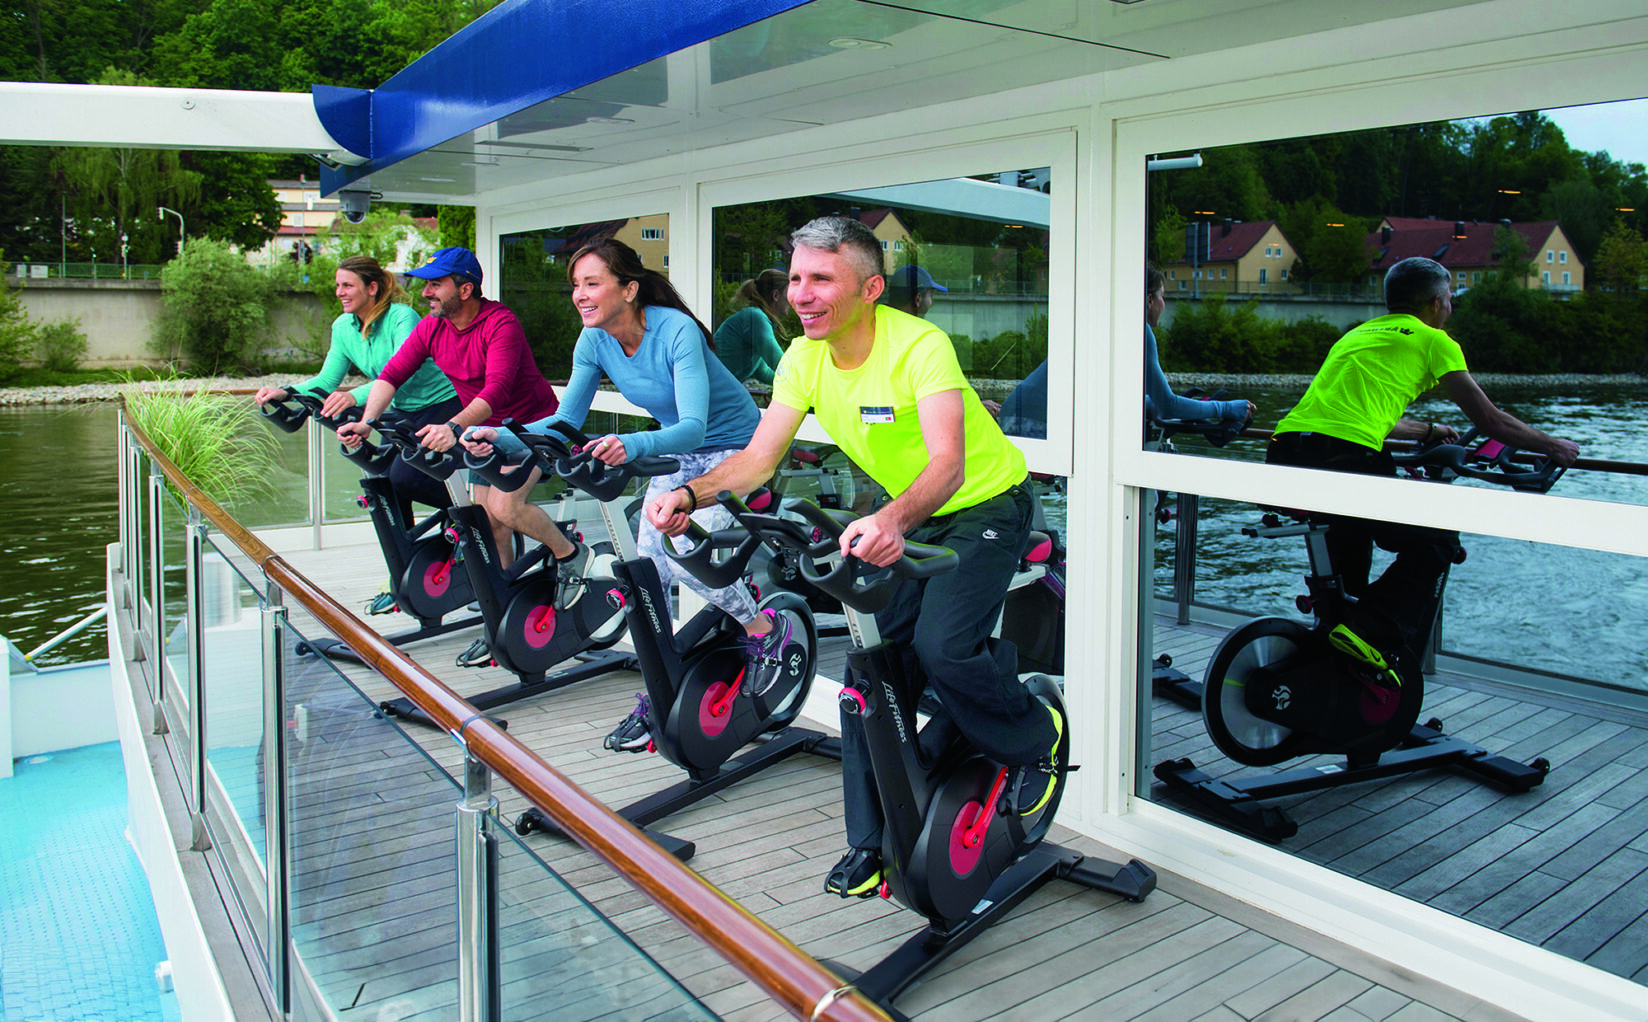 People on stationary bikes for a spin class.